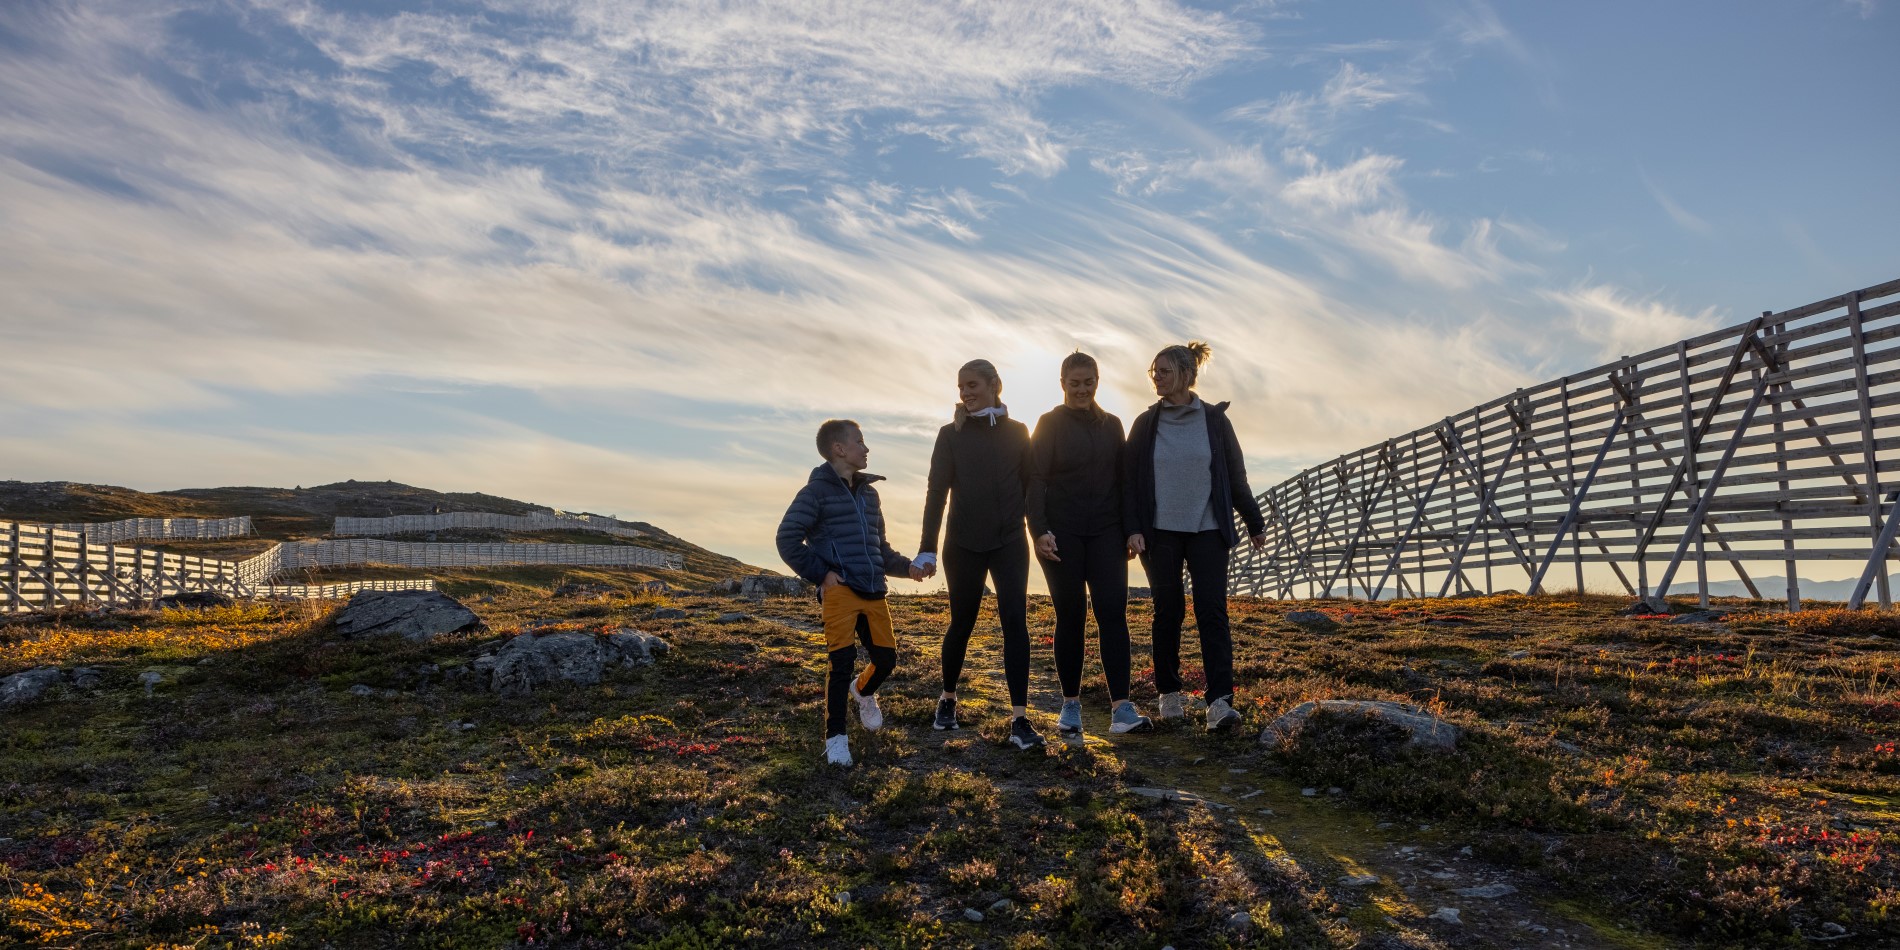 Three adults and a child on a hike in Hammerfest